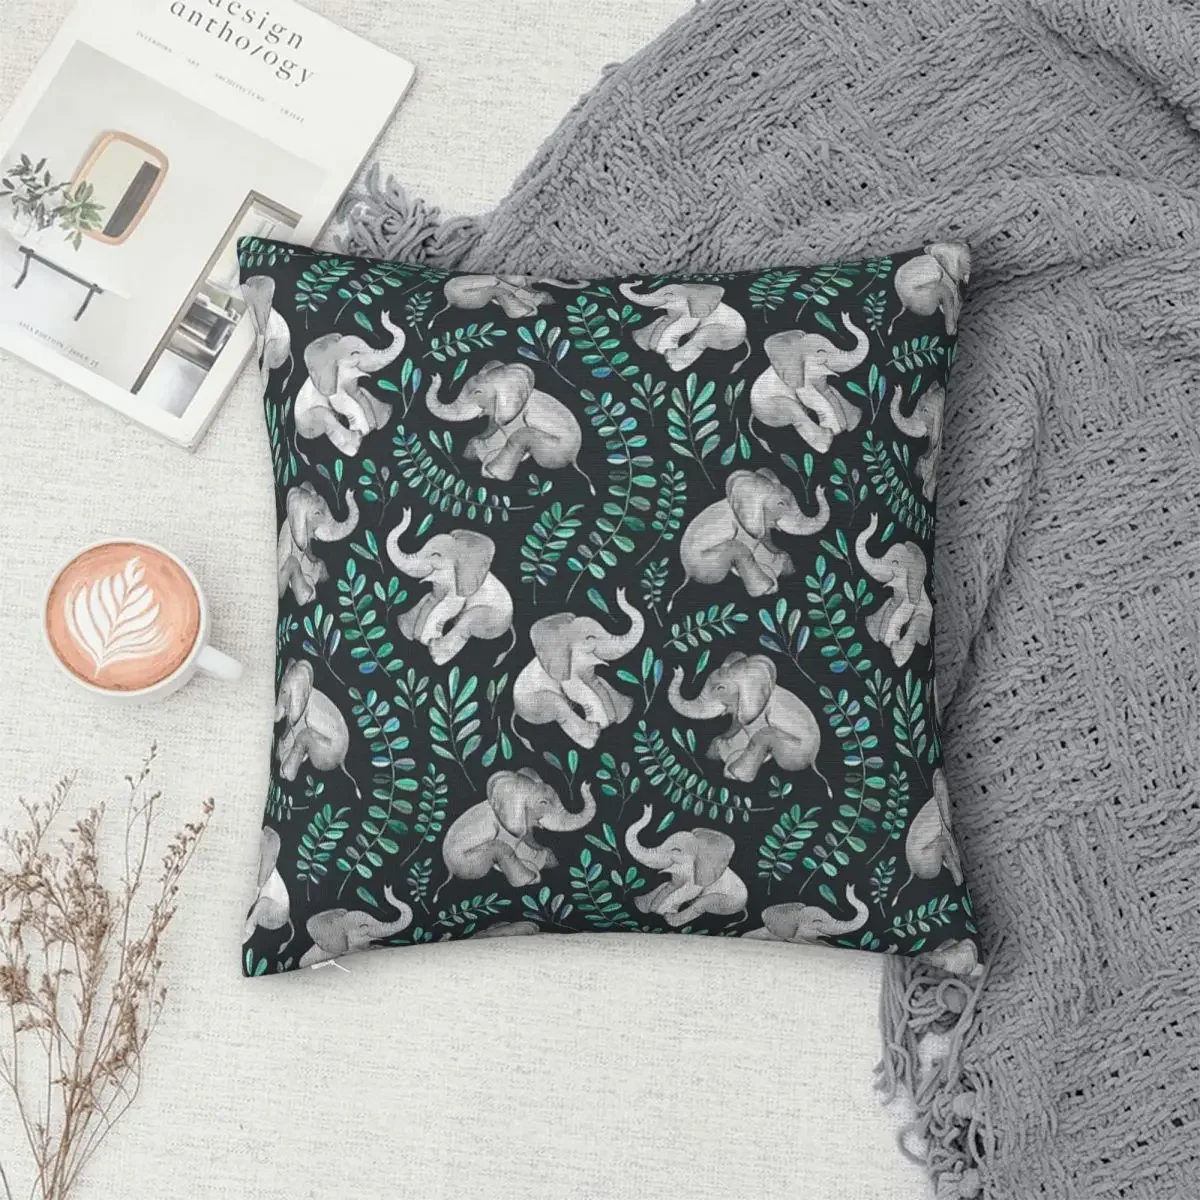 

Laughing Baby Elephants - Emerald And Turquoise Pillowcase Cover Cushion Comfort Throw Pillow Sofa Decorative Cushions Used